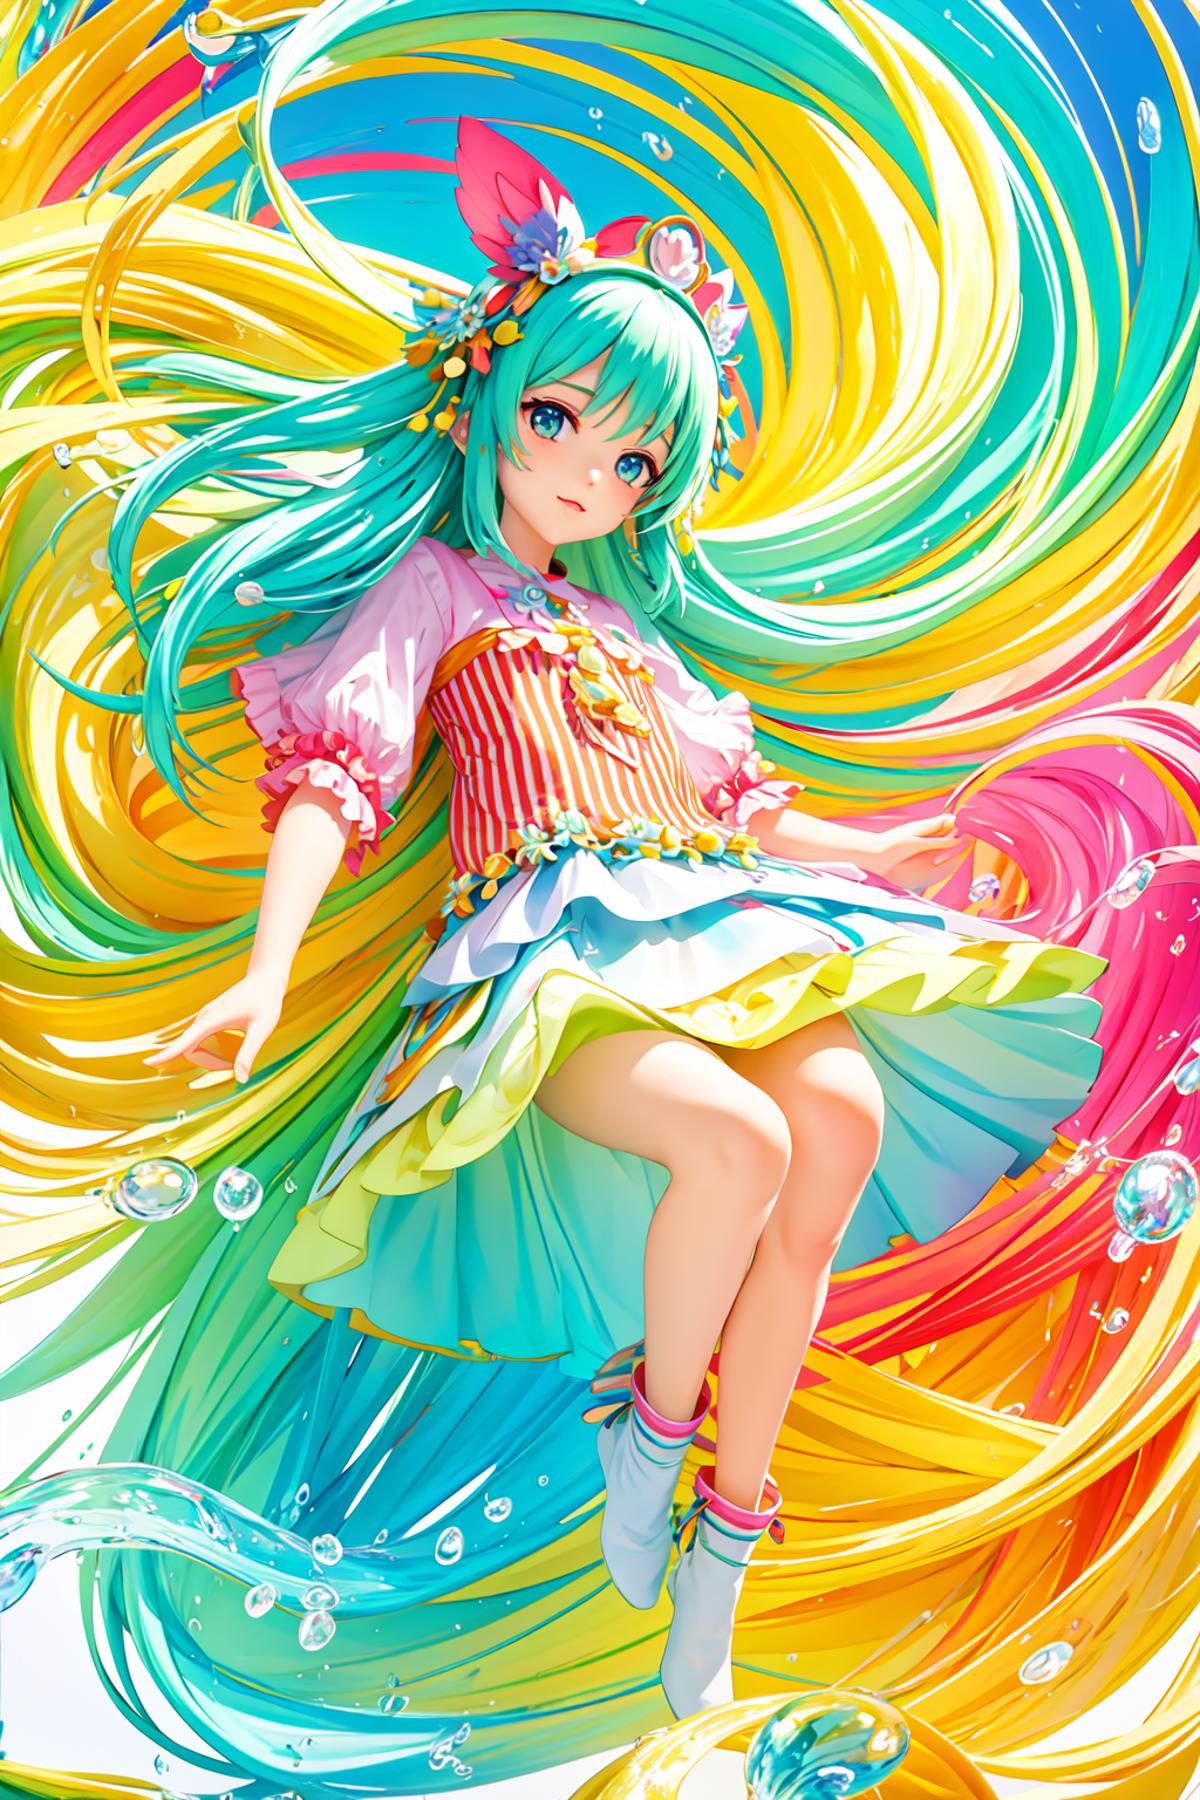 A Colorful Anime-Inspired Illustration of a Girl with Long Hair